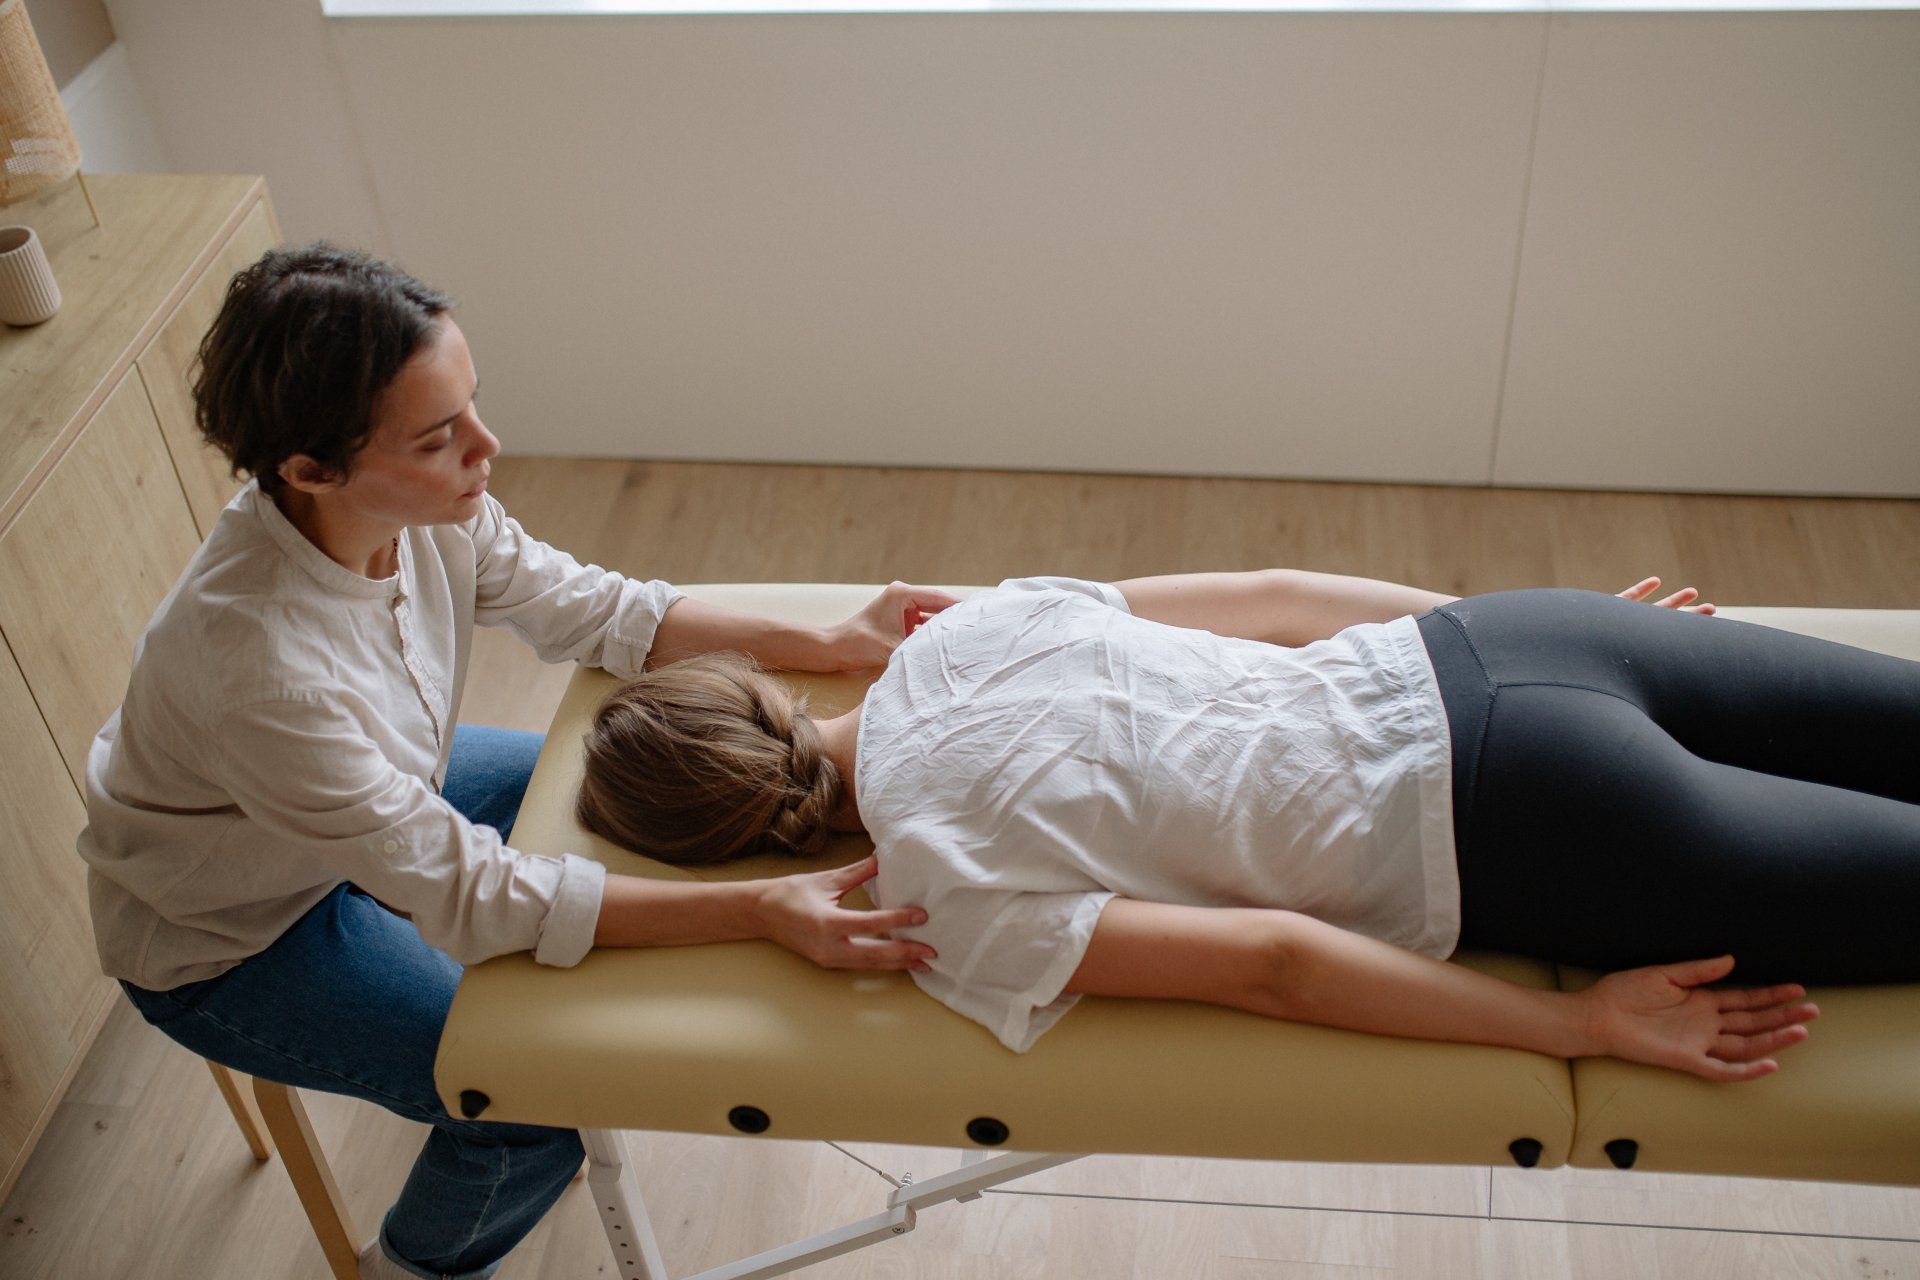 Chiropractor examining patient on adjusting table